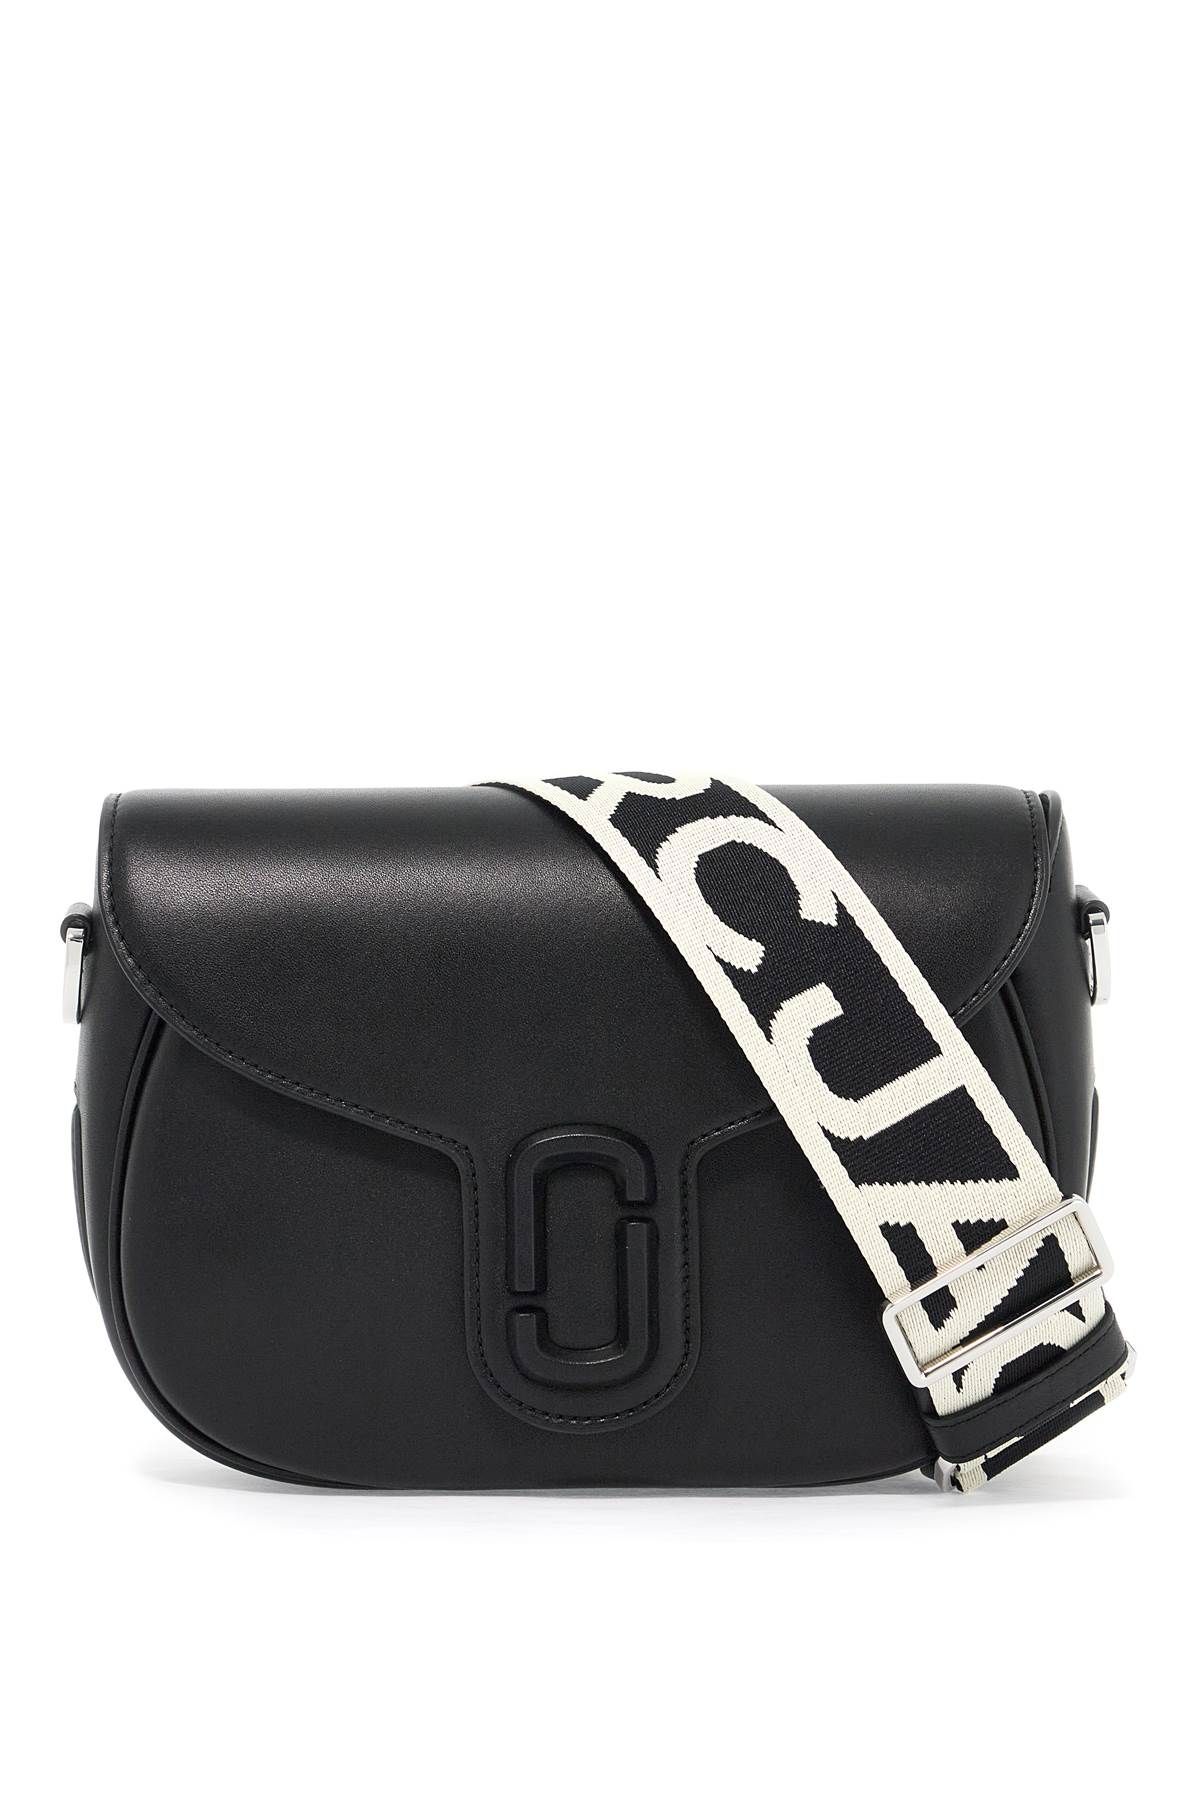 Marc Jacobs MARC JACOBS the covered j marc large saddle bag